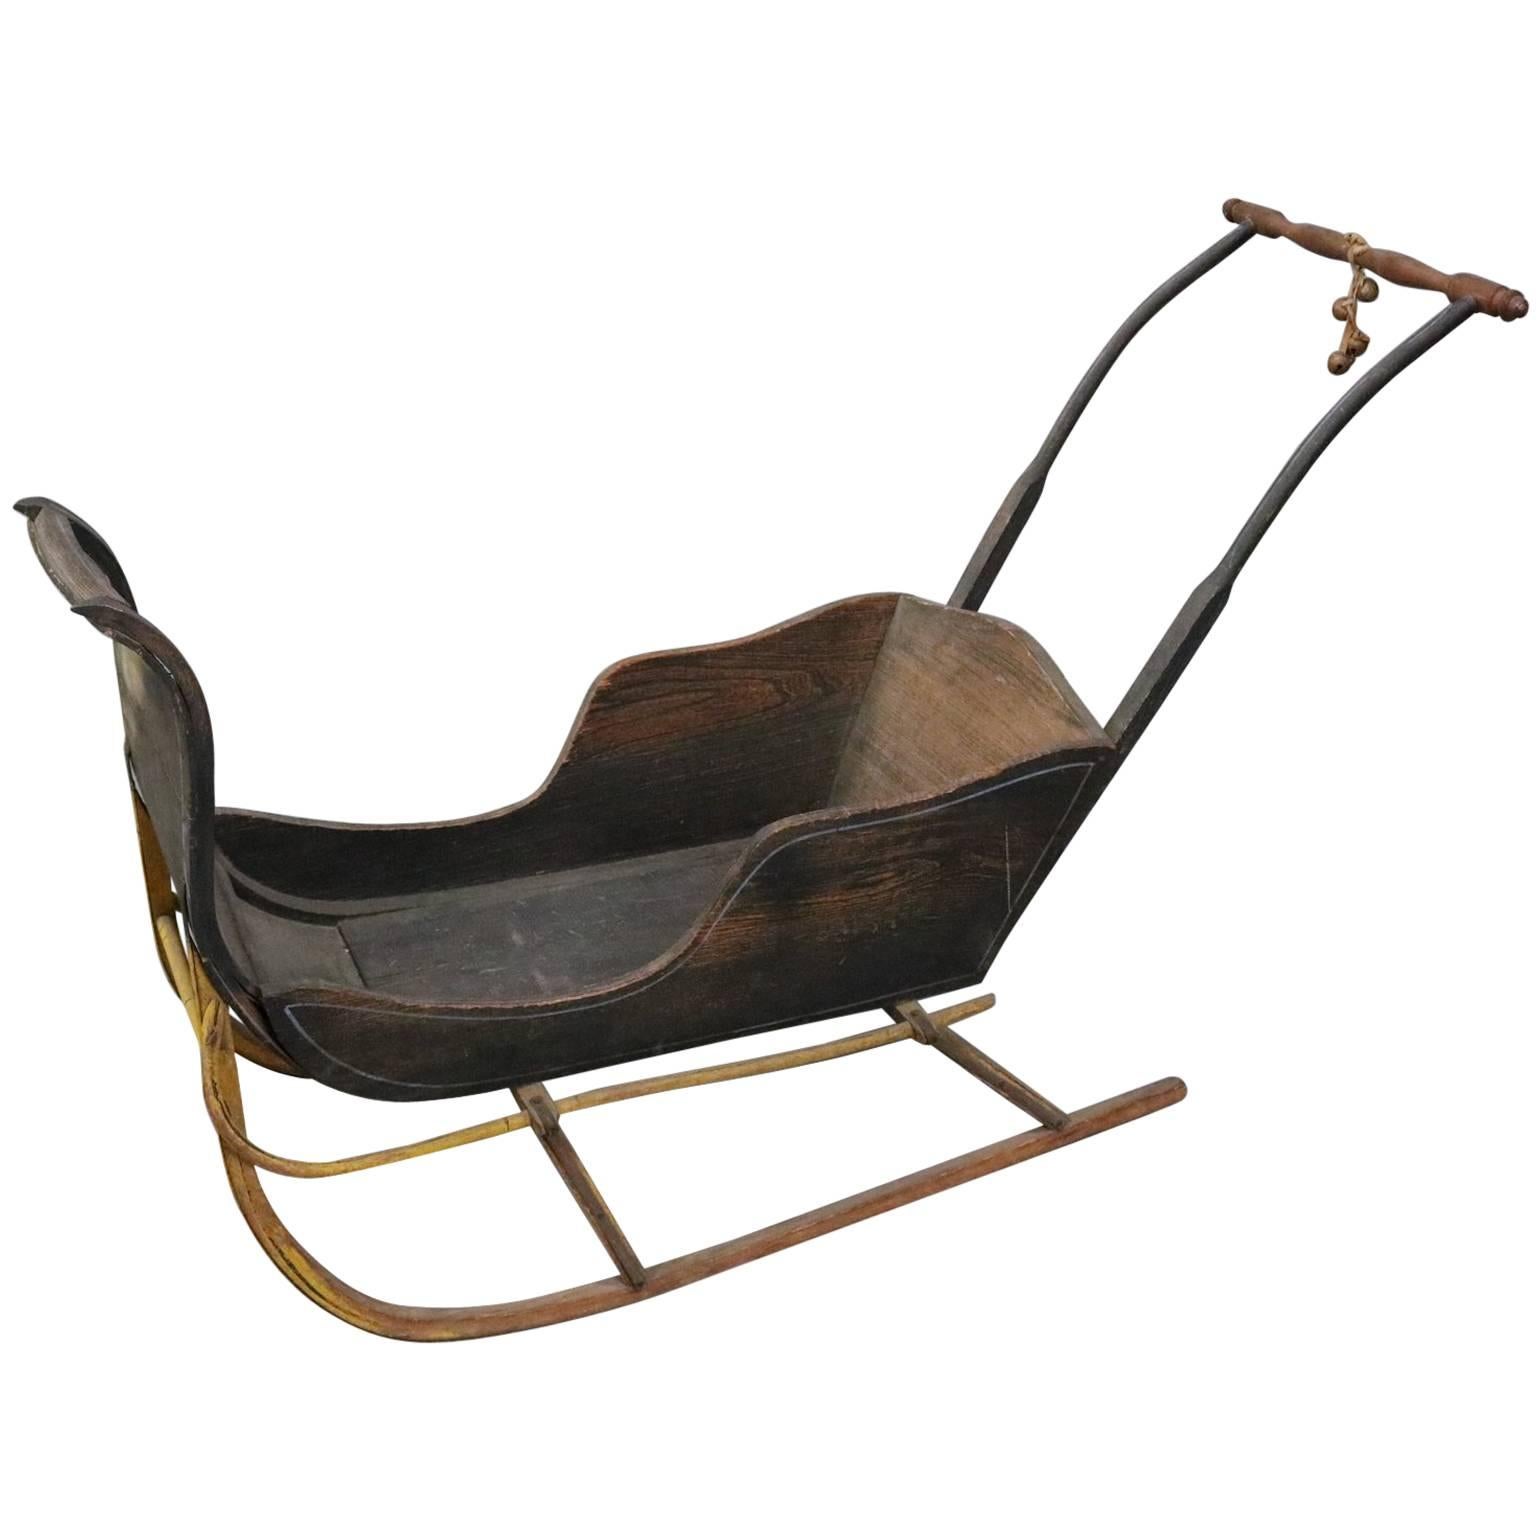 Antique Child's Push Sled with Original Finish and Hand-Painted Details